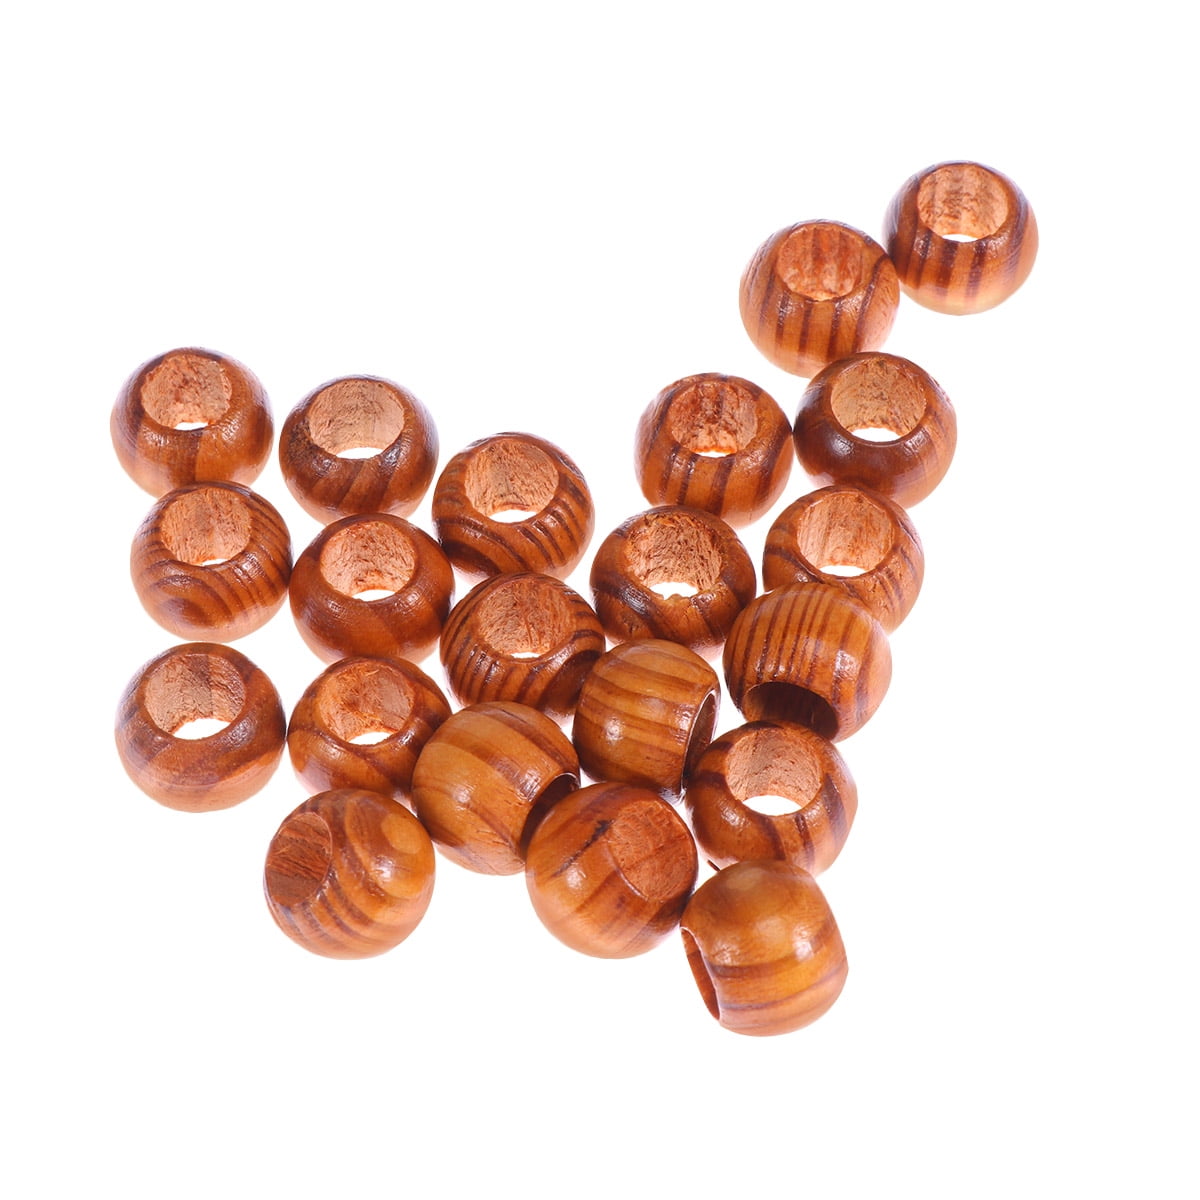  Wooden Beads 20mm Natural Beads 100Pcs Round Wood Beads for  Crafts DIY Hand Made Decorations Jewelry Craft Making - (Color: Wood Color)  : Arts, Crafts & Sewing